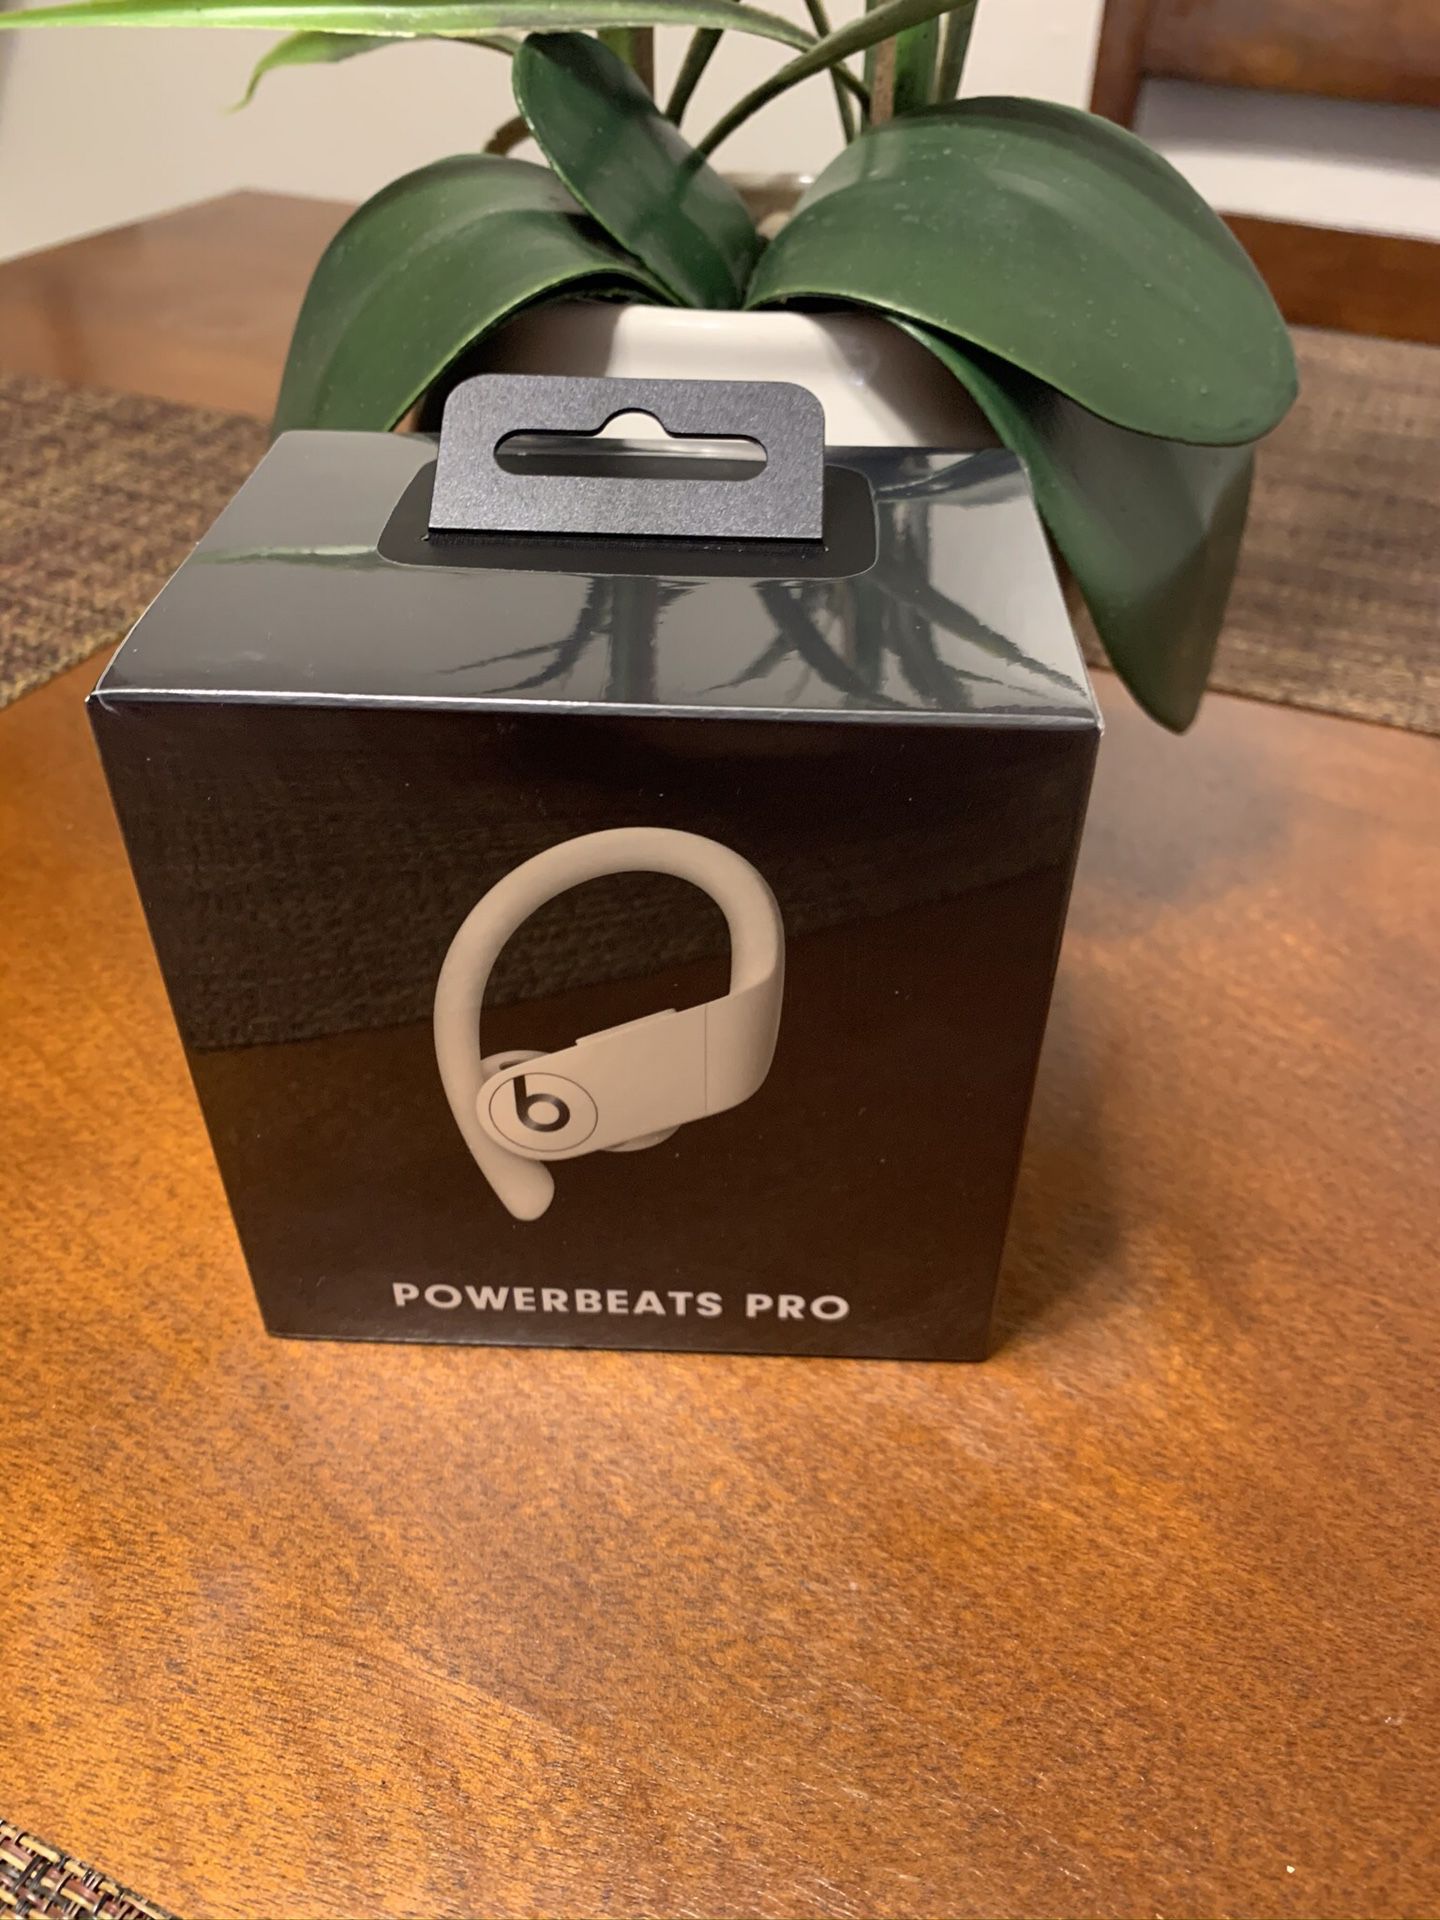 powerbeats pro brand new authentic sealed box unopened still wrapped on it $120 Very FIRM